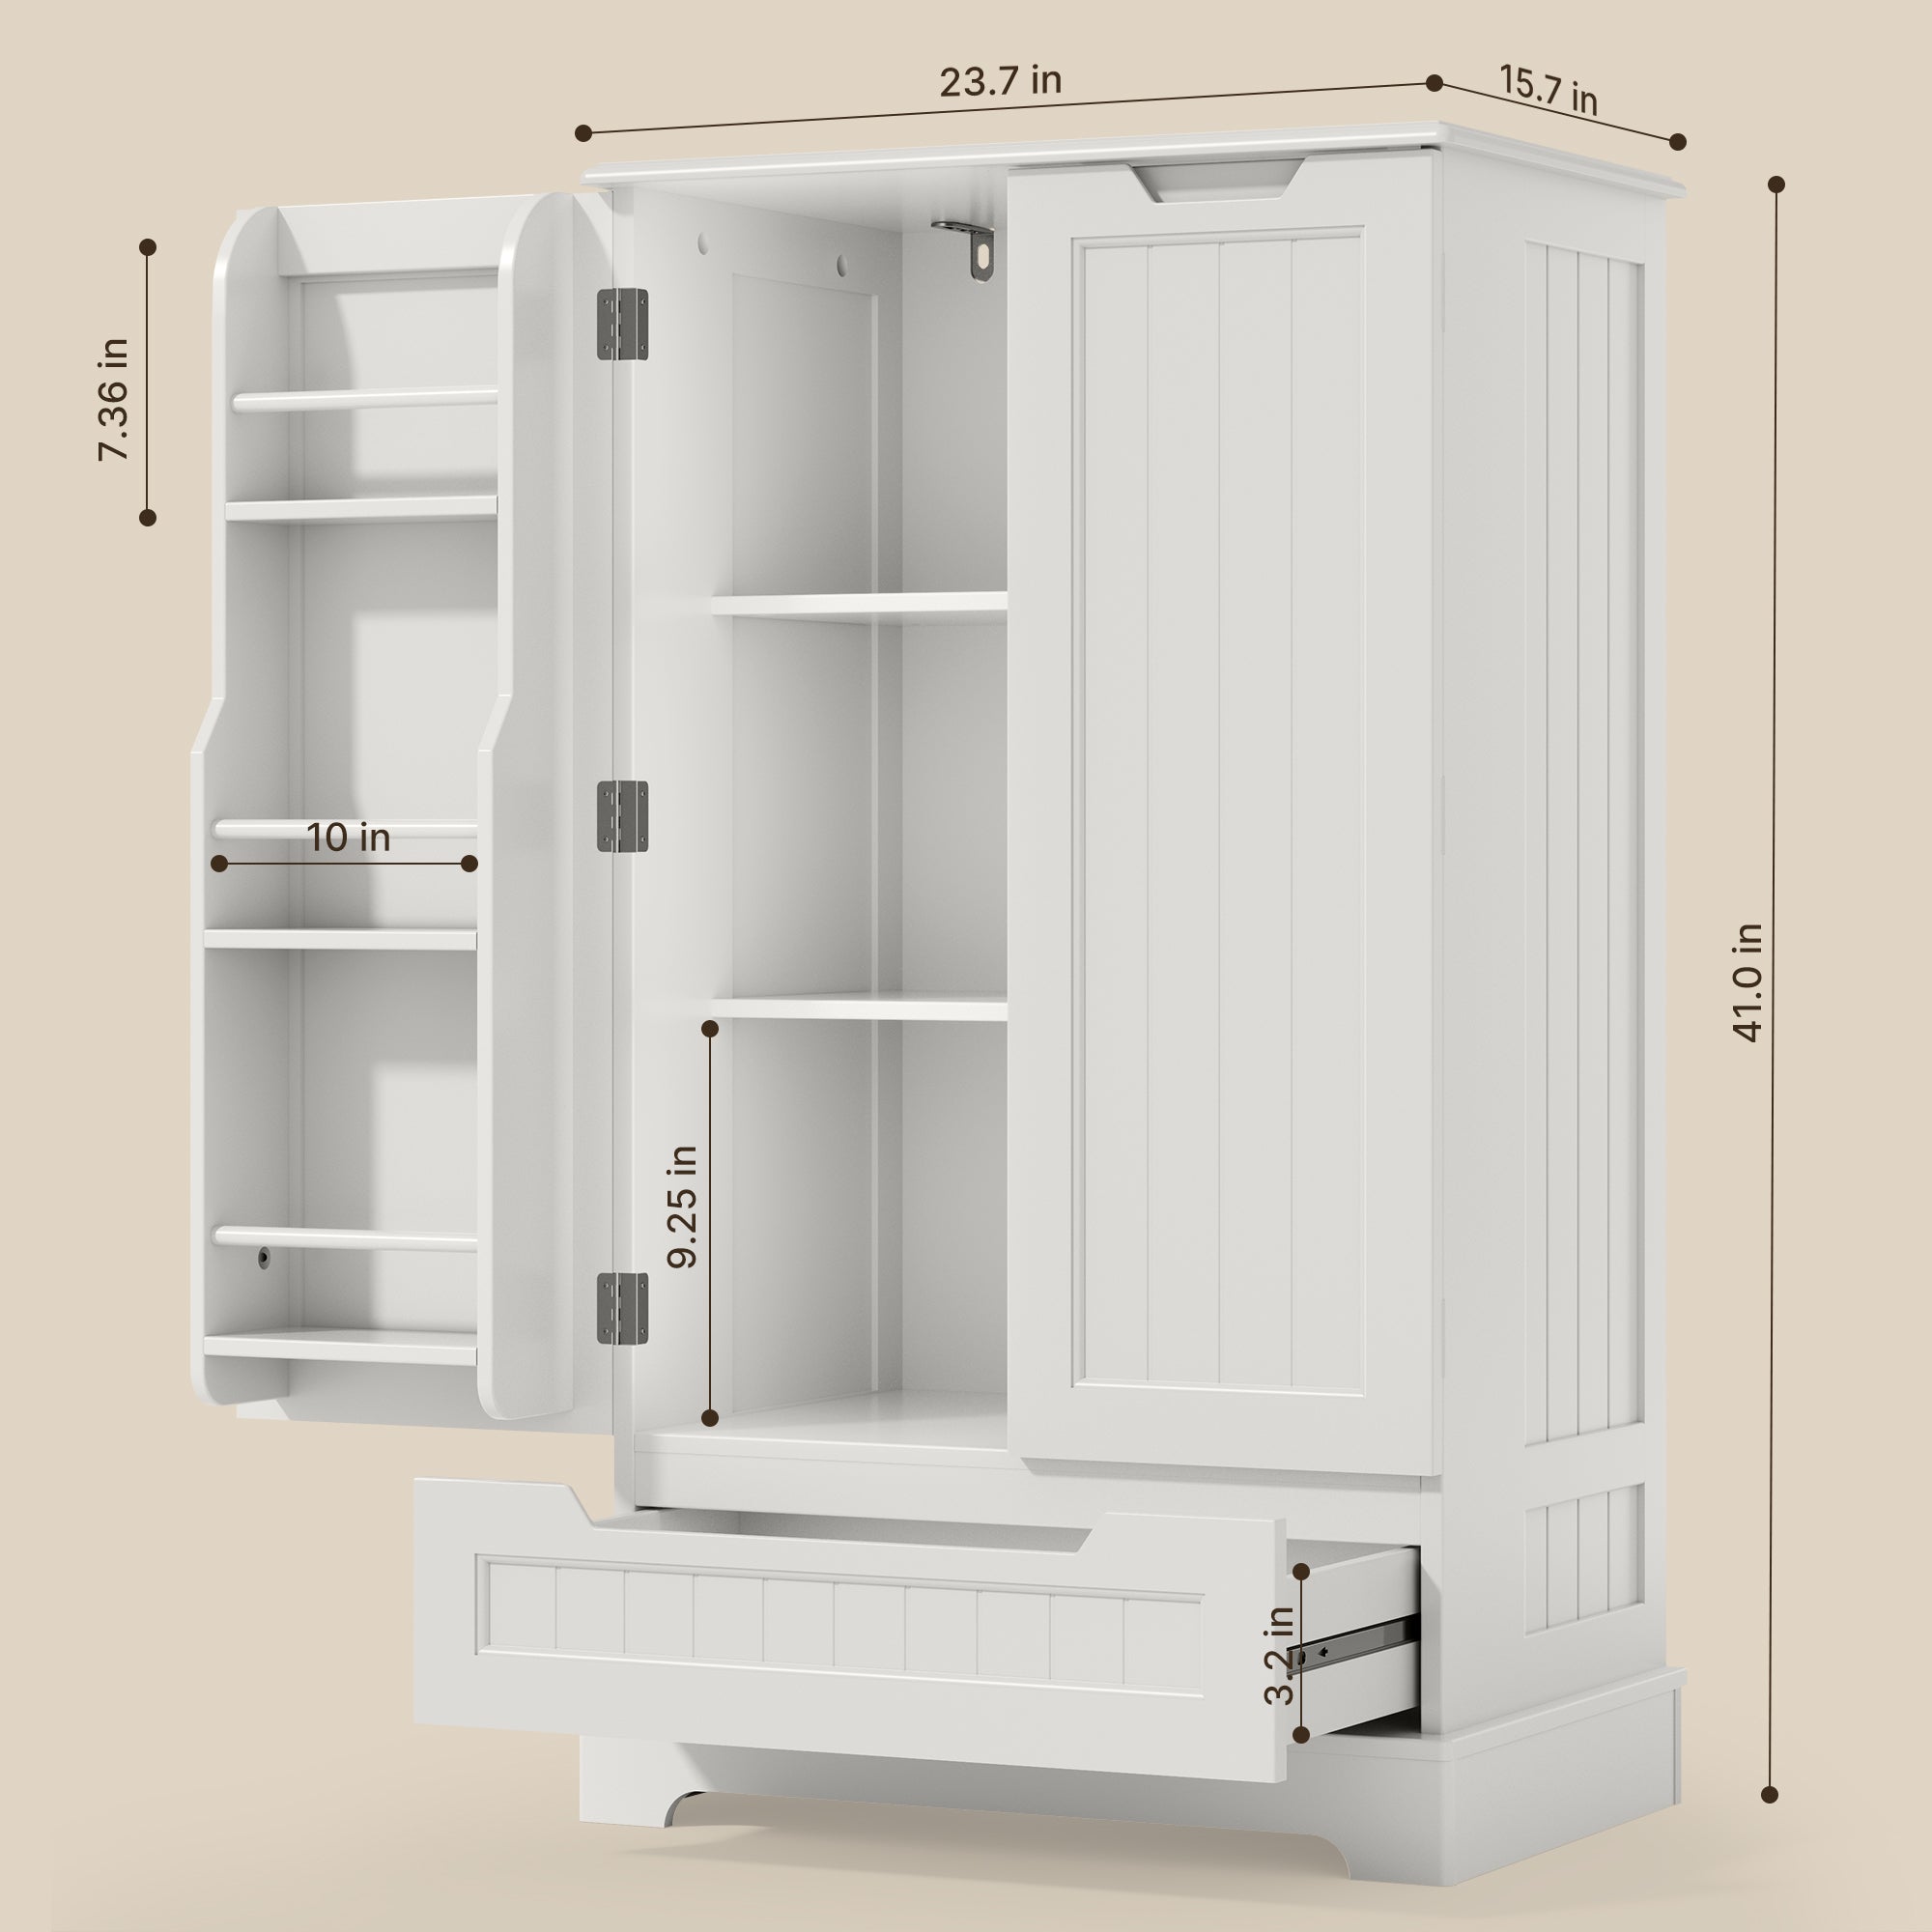 Gizoon AP29 41" Pantry Storage Cabinet with Doors and Shelves with Drawer